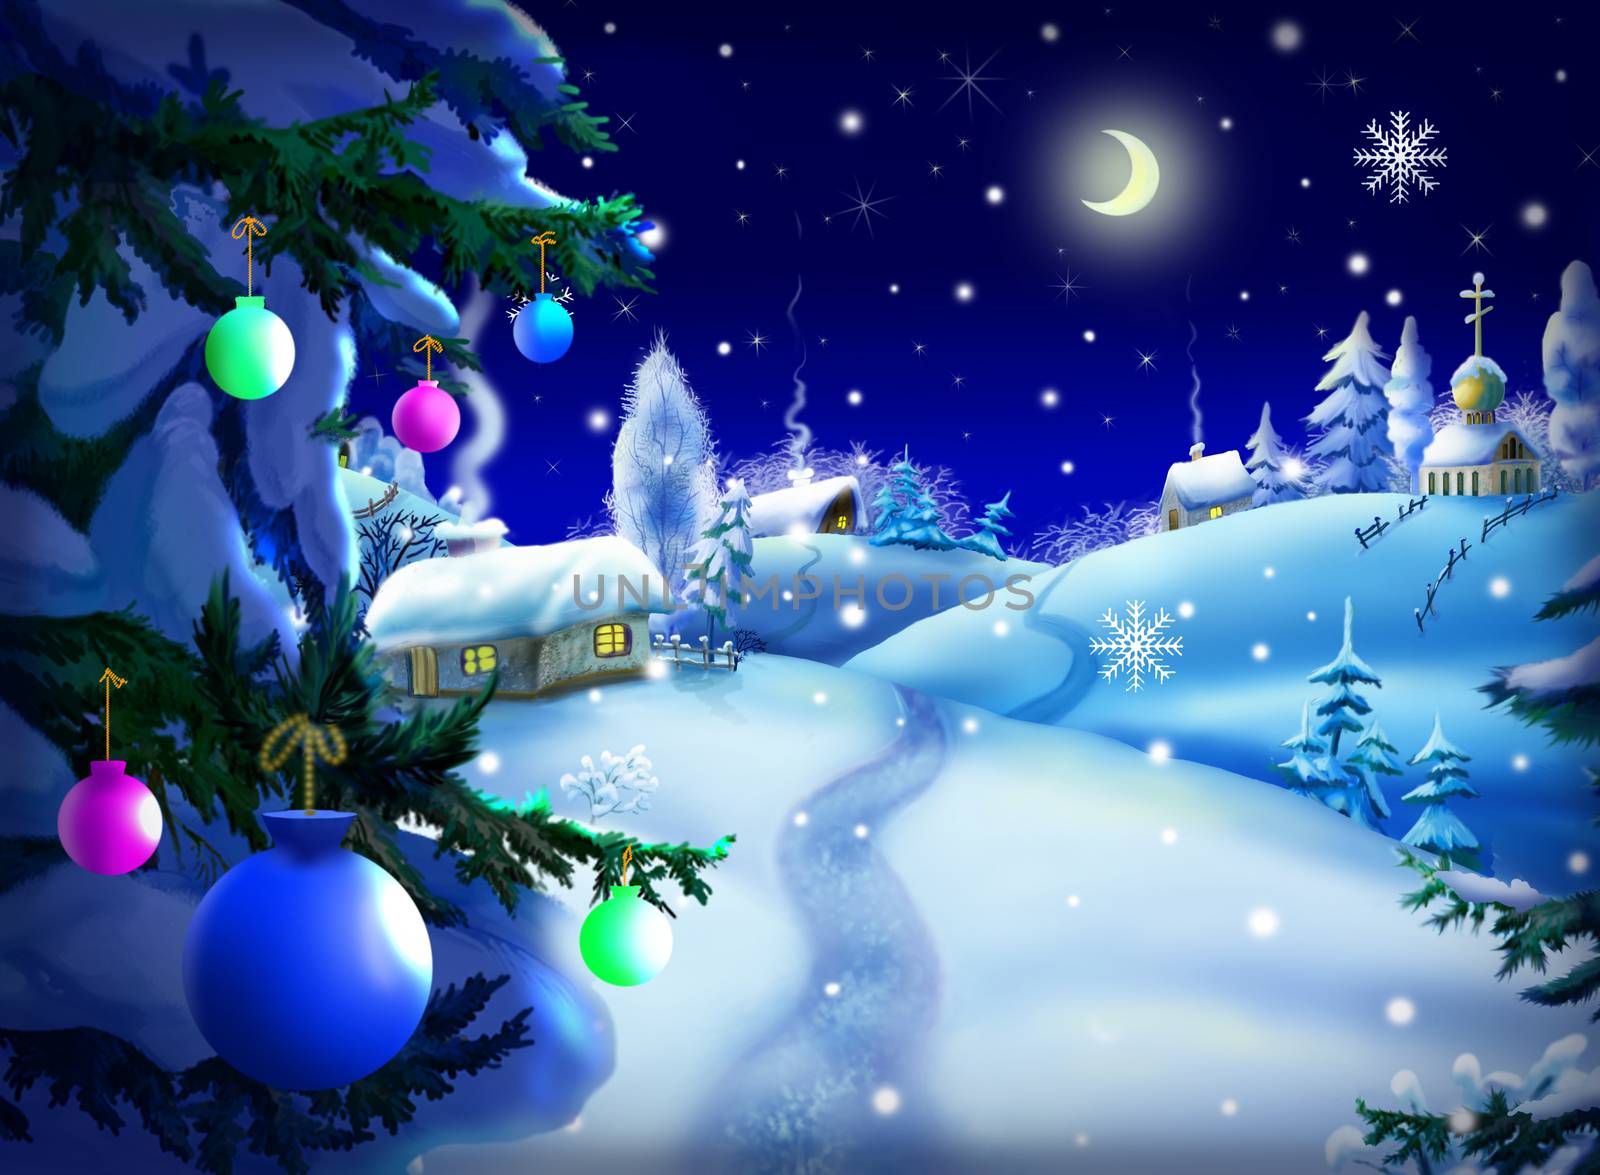 Christmas & New Year Night Landscape with Christmas Tree and small village  in a wonderful winter night.  Outdoor scene, handmade illustration  in a classic cartoon style.